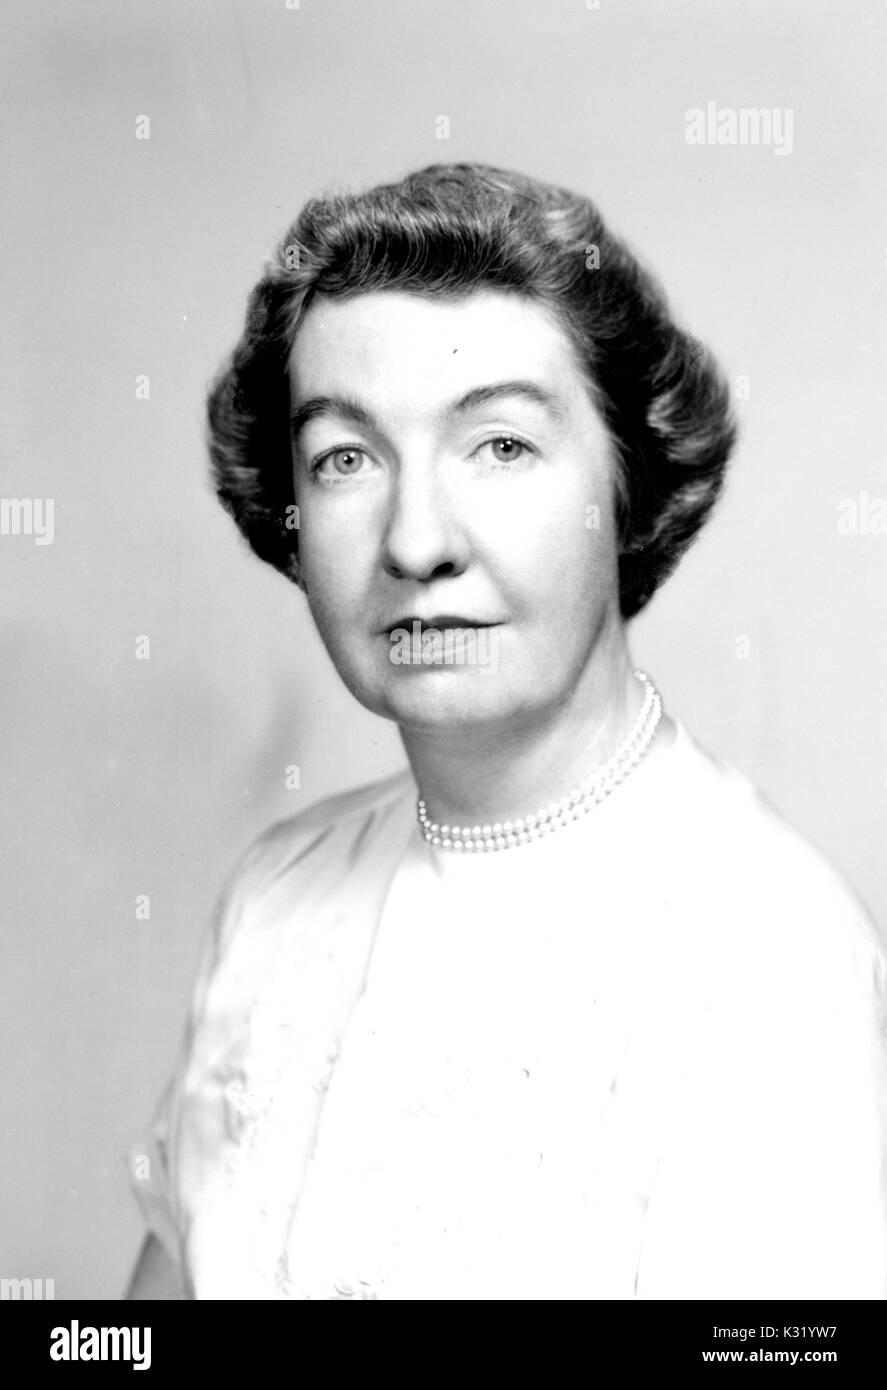 Grayscale portrait photograph, shoulders up, of Blanche Duncan Coll, who received her masters of history from Johns Hopkins University, wearing white dress and pearls, Baltimore, Maryland, 1957. Stock Photo